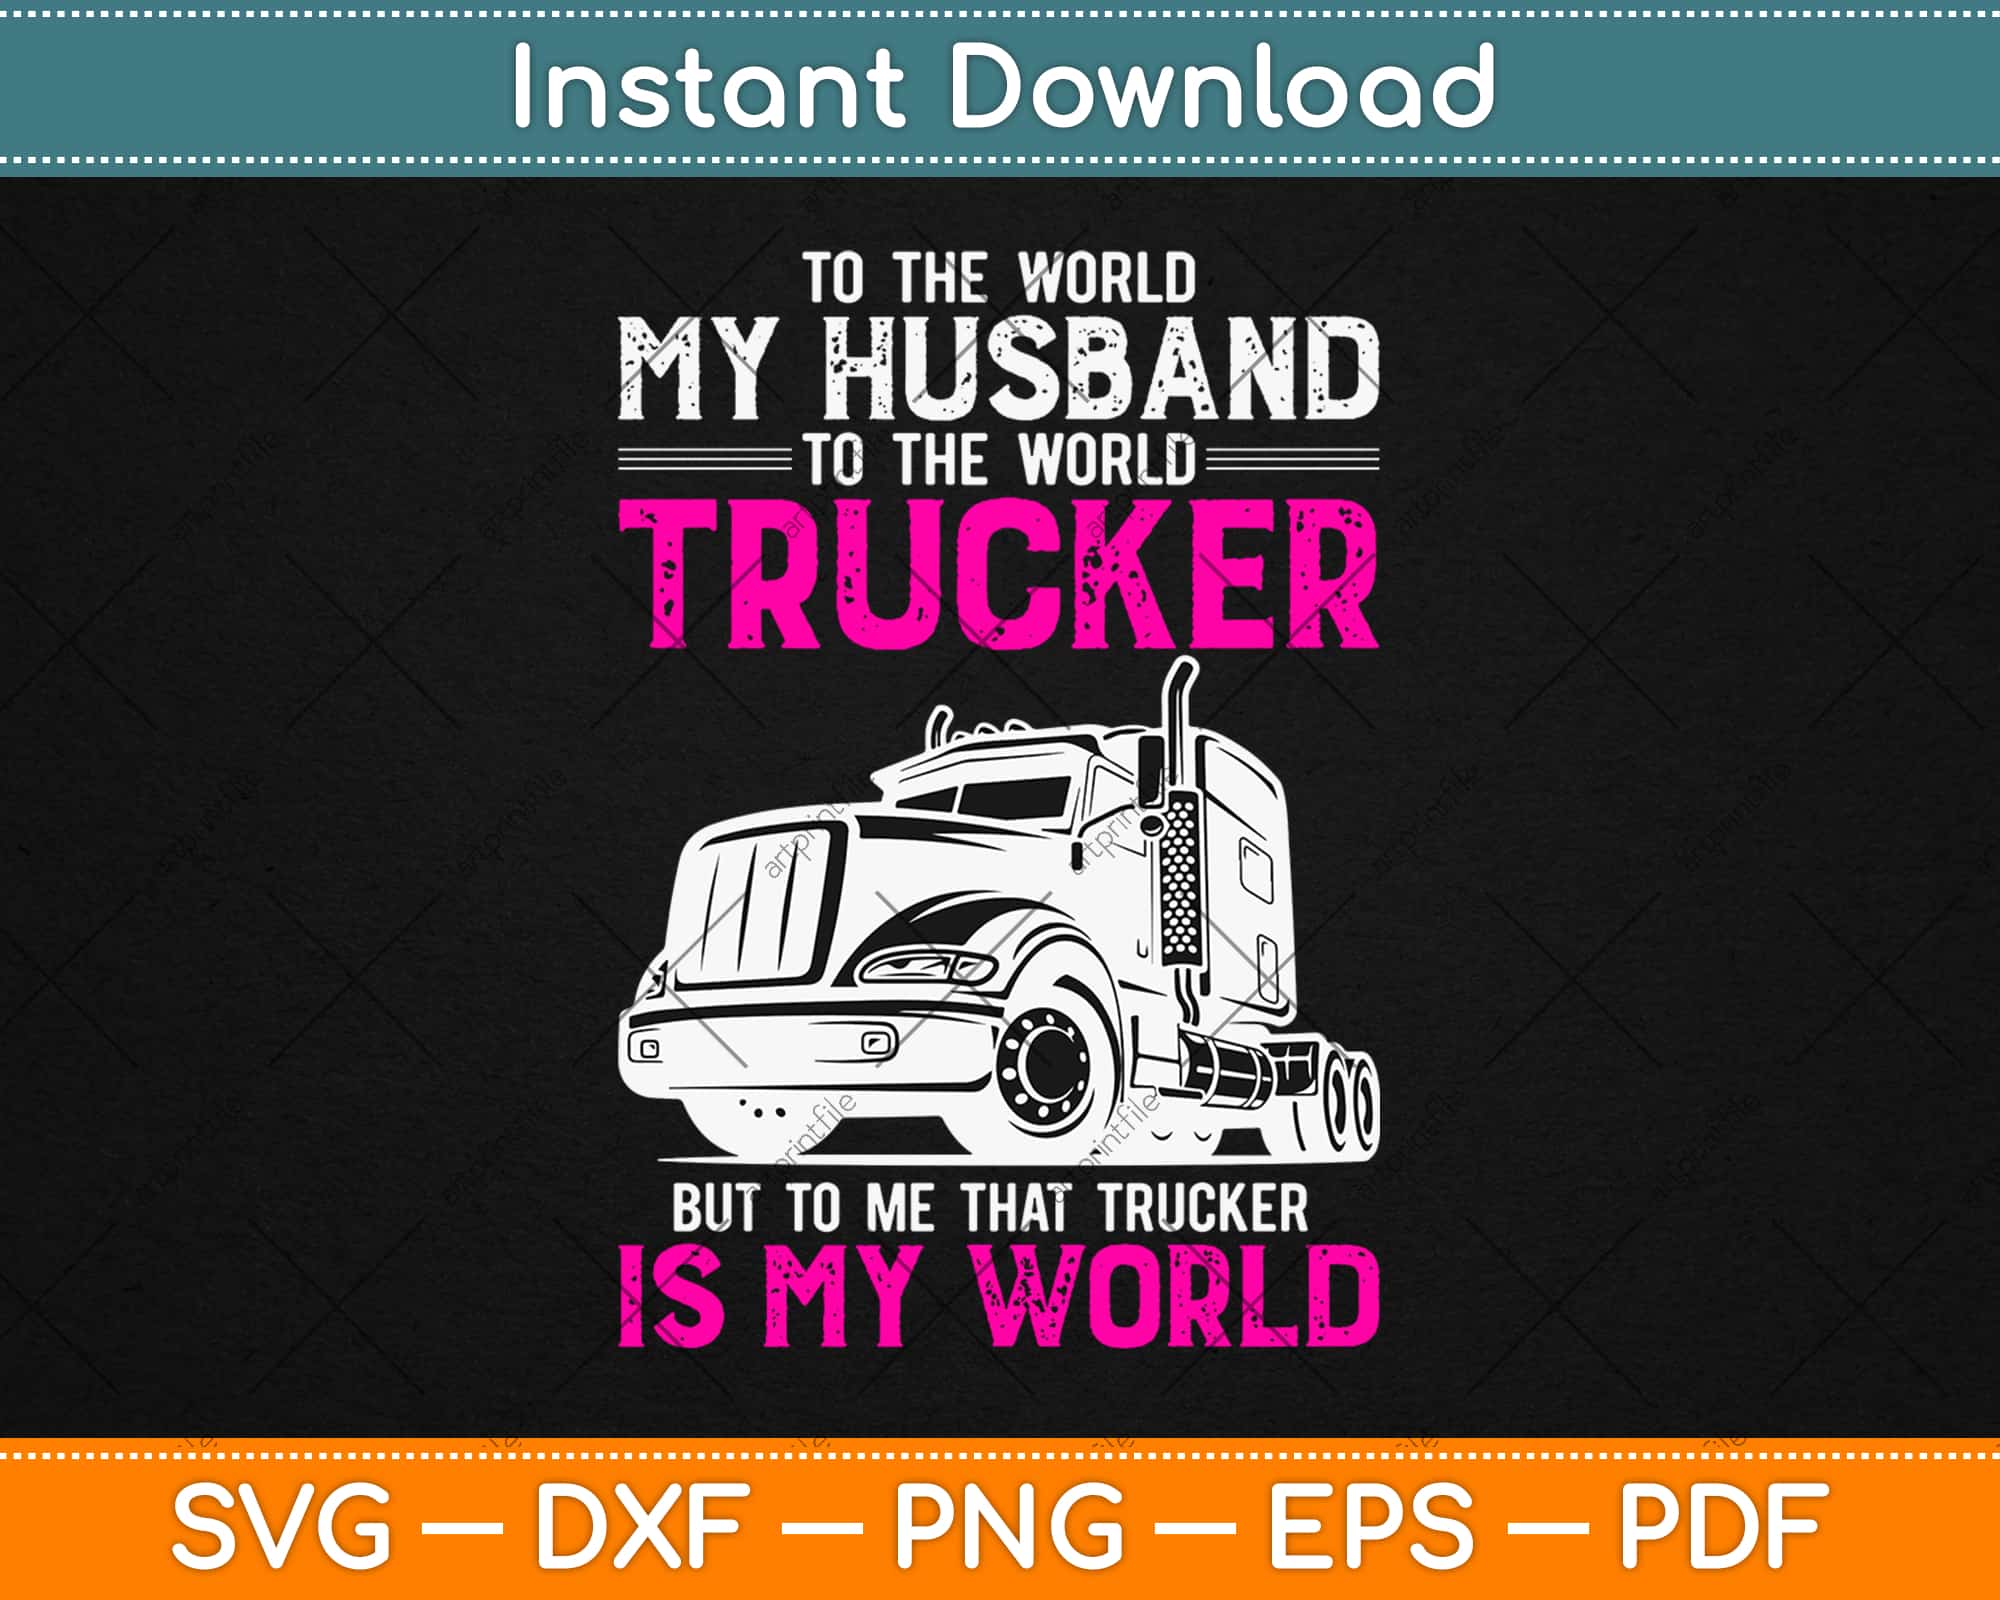 Truckers Wife Svg File Truck Driver Svg File Semi Truck Svg File Vector Art For Commercial Personal Use Cricut Cameo Silhouette Vinyl Die Cuts Papercraft Kromasol Com